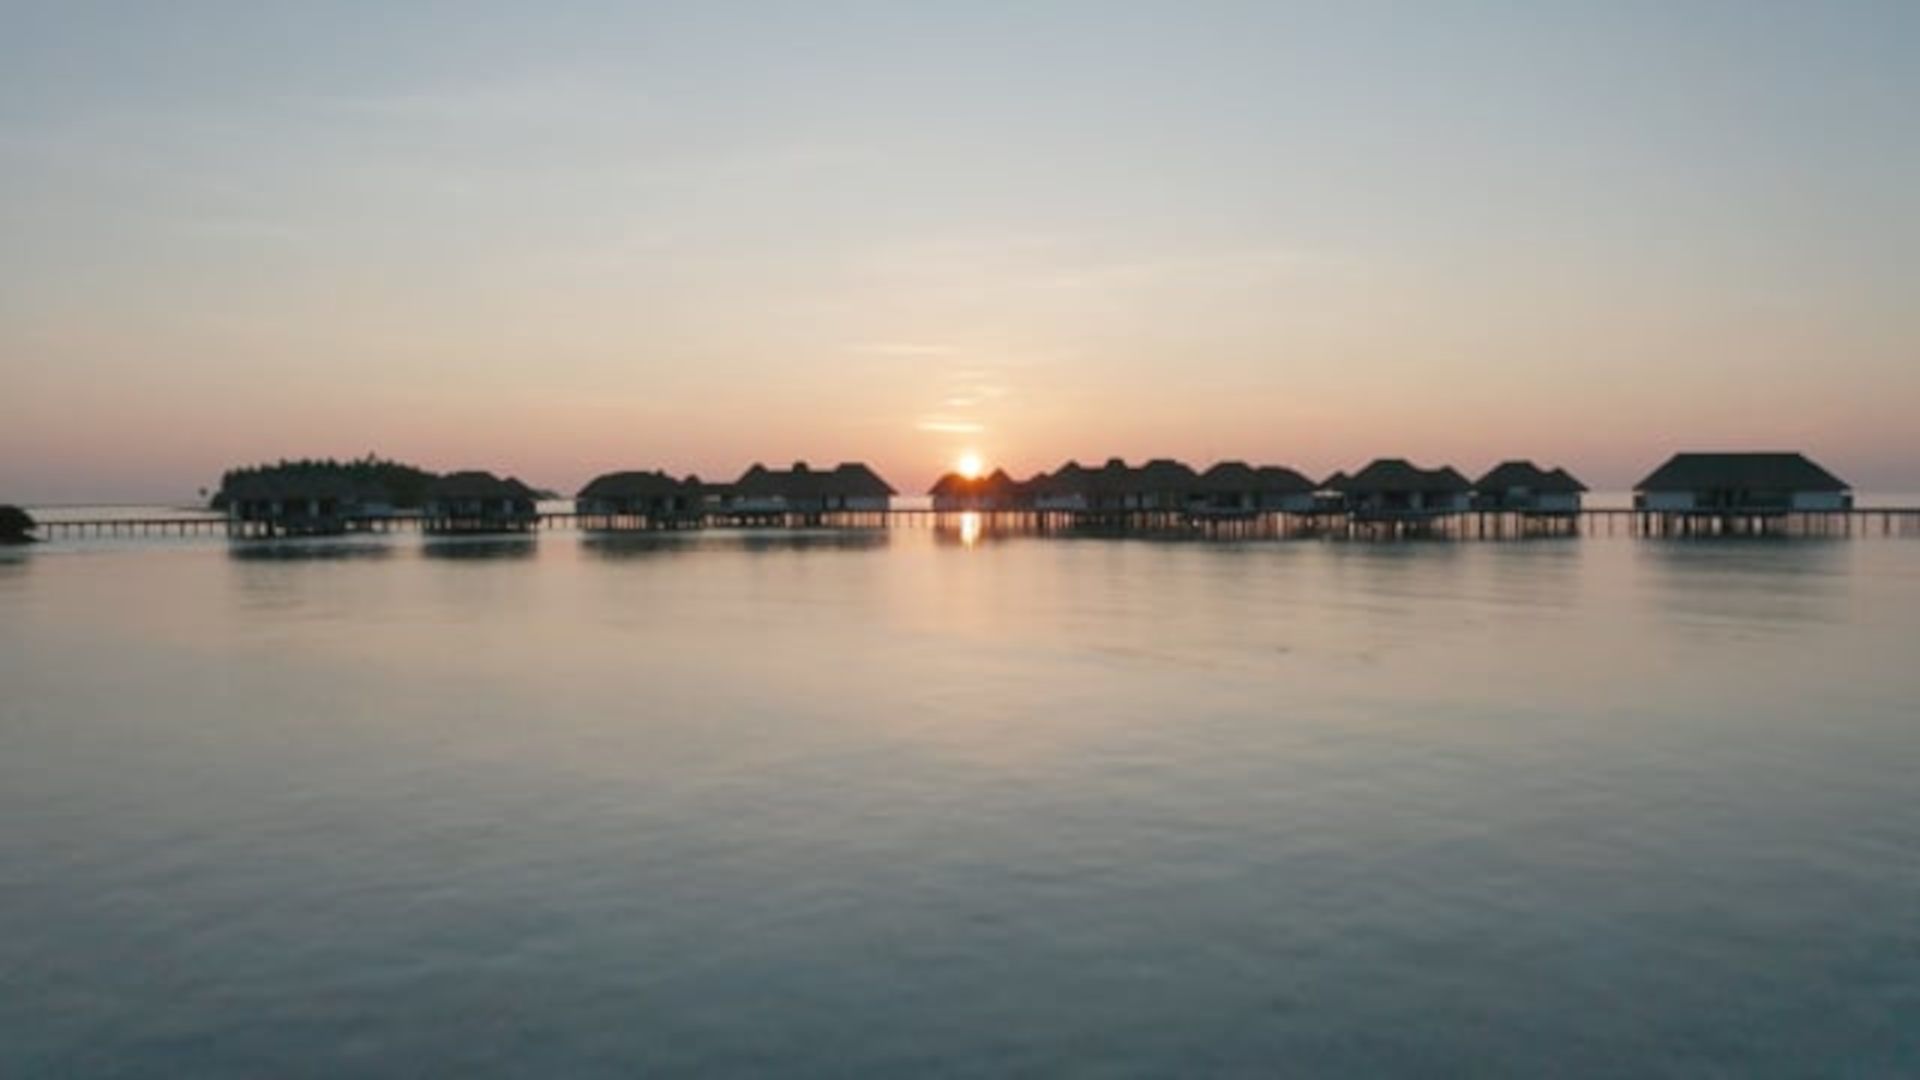 A Body Of Water With Buildings And Trees In The Background